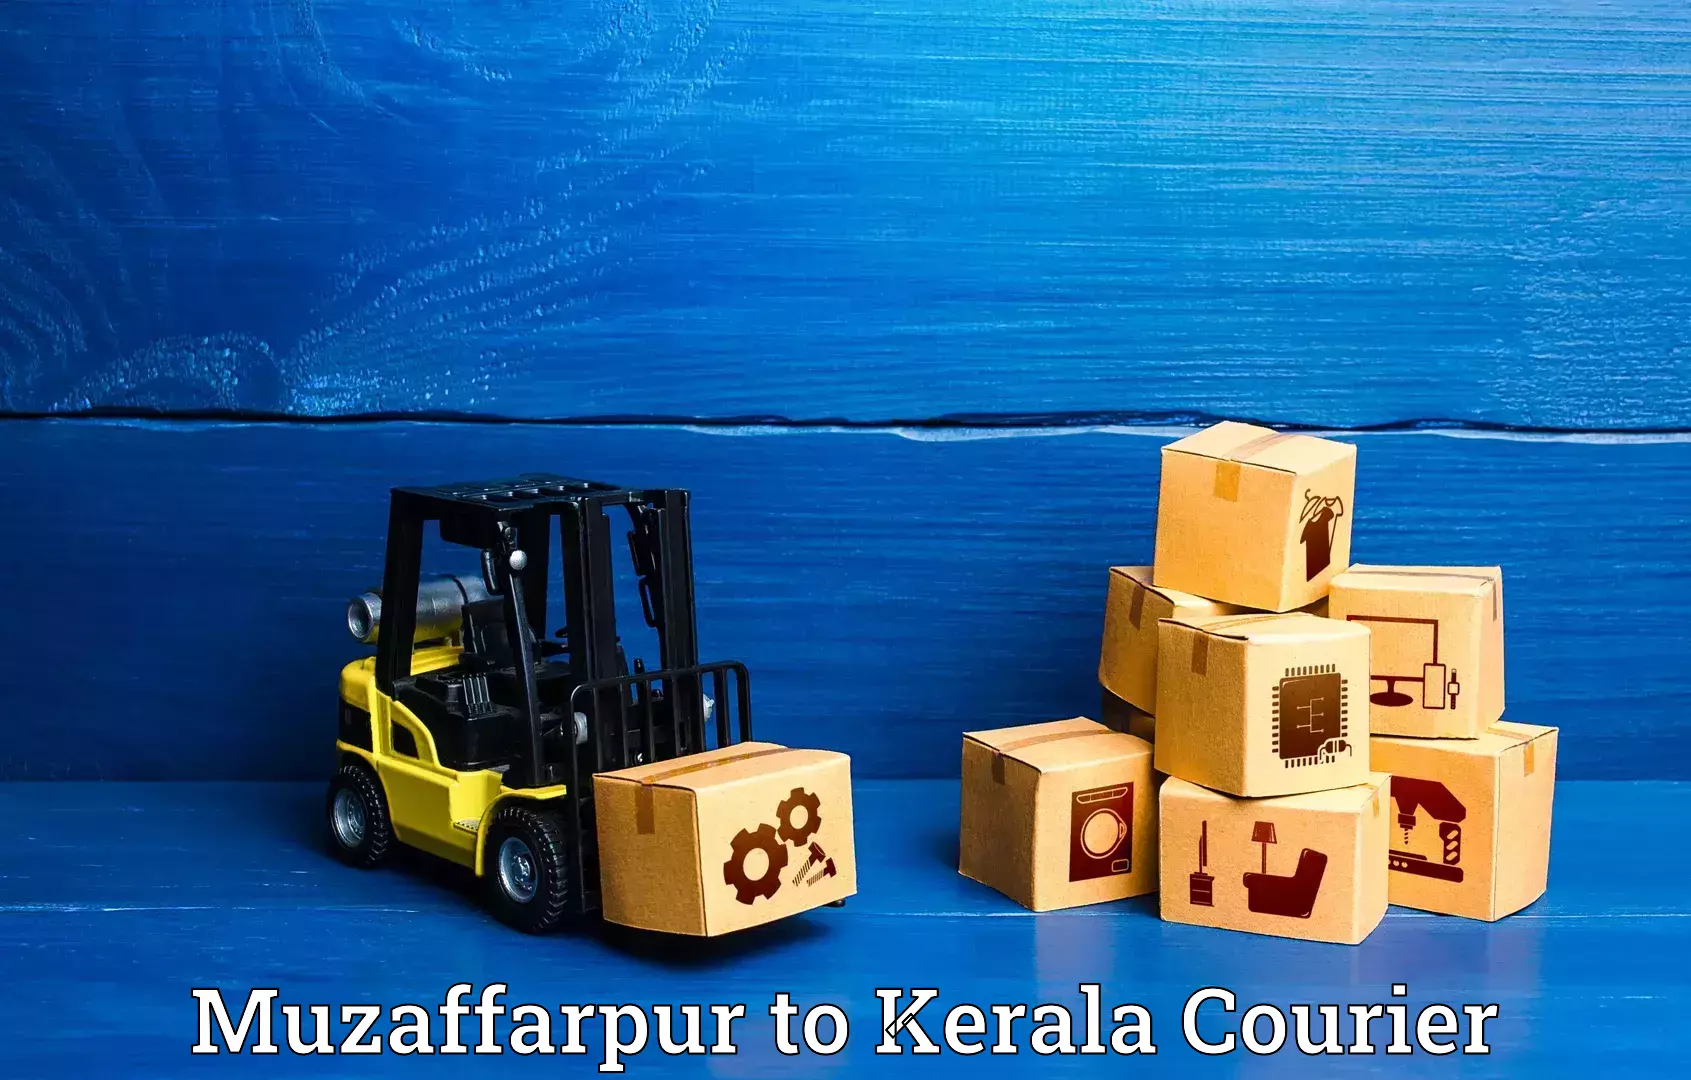 Luggage transport consulting in Muzaffarpur to Cochin University of Science and Technology